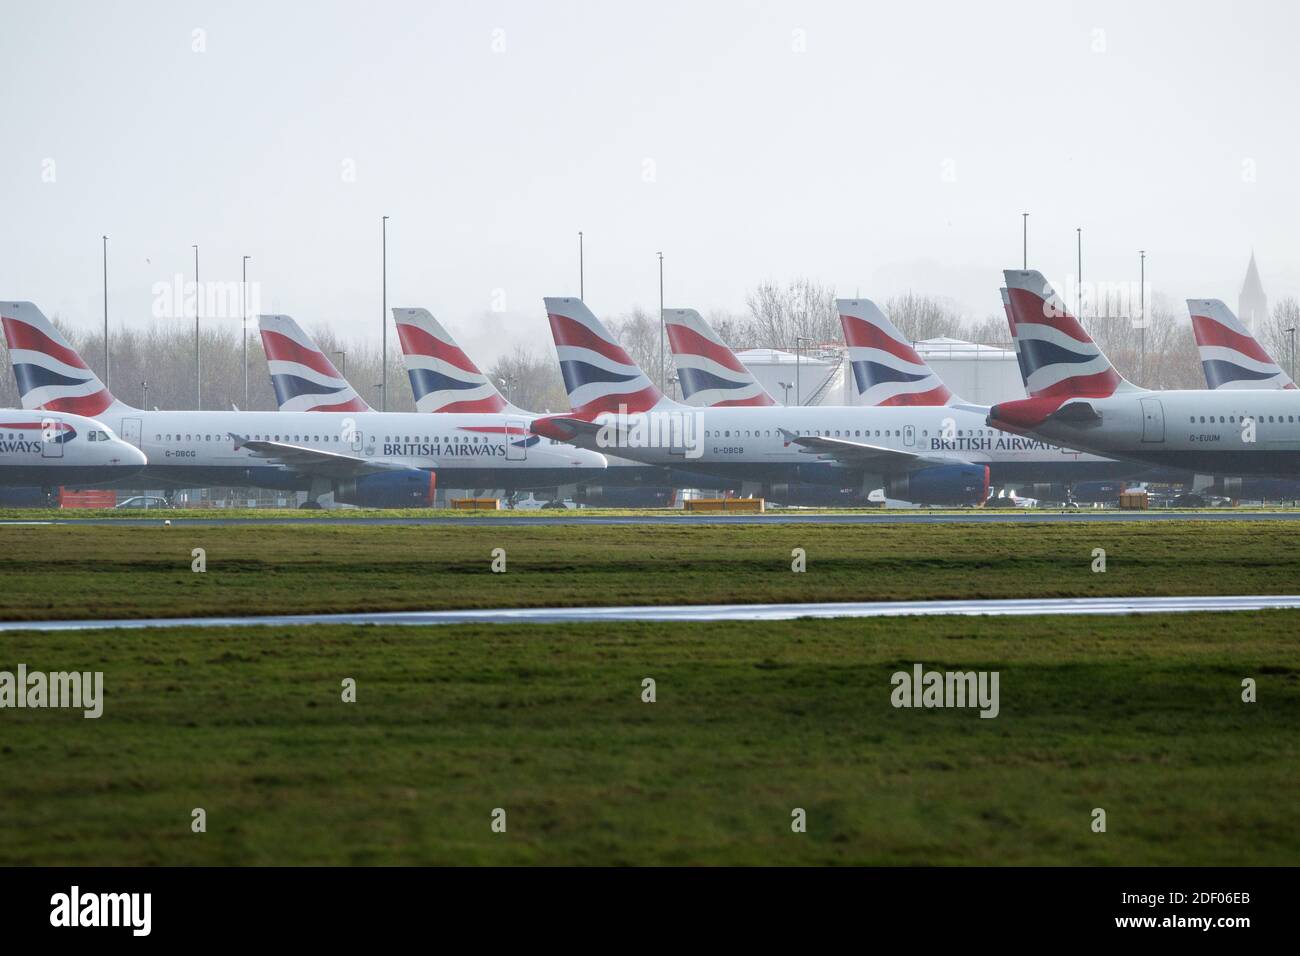 Glasgow, Scotland, UK. 2nd Dec, 2020. Pictured:British Airways airbus jets still stand grounded due to the coronavirus (COVID19) pandemic. Due to the uncertainty and a massive and unprecedented downturn in the global airline industry, British Airways (BA) have laid over a quarter of their staff. Glasgow Airport have now parked the grounded jets over to a smaller area of the tarmac as they used to occupy part of the airports second runway. Credit: Colin Fisher/Alamy Live News Stock Photo